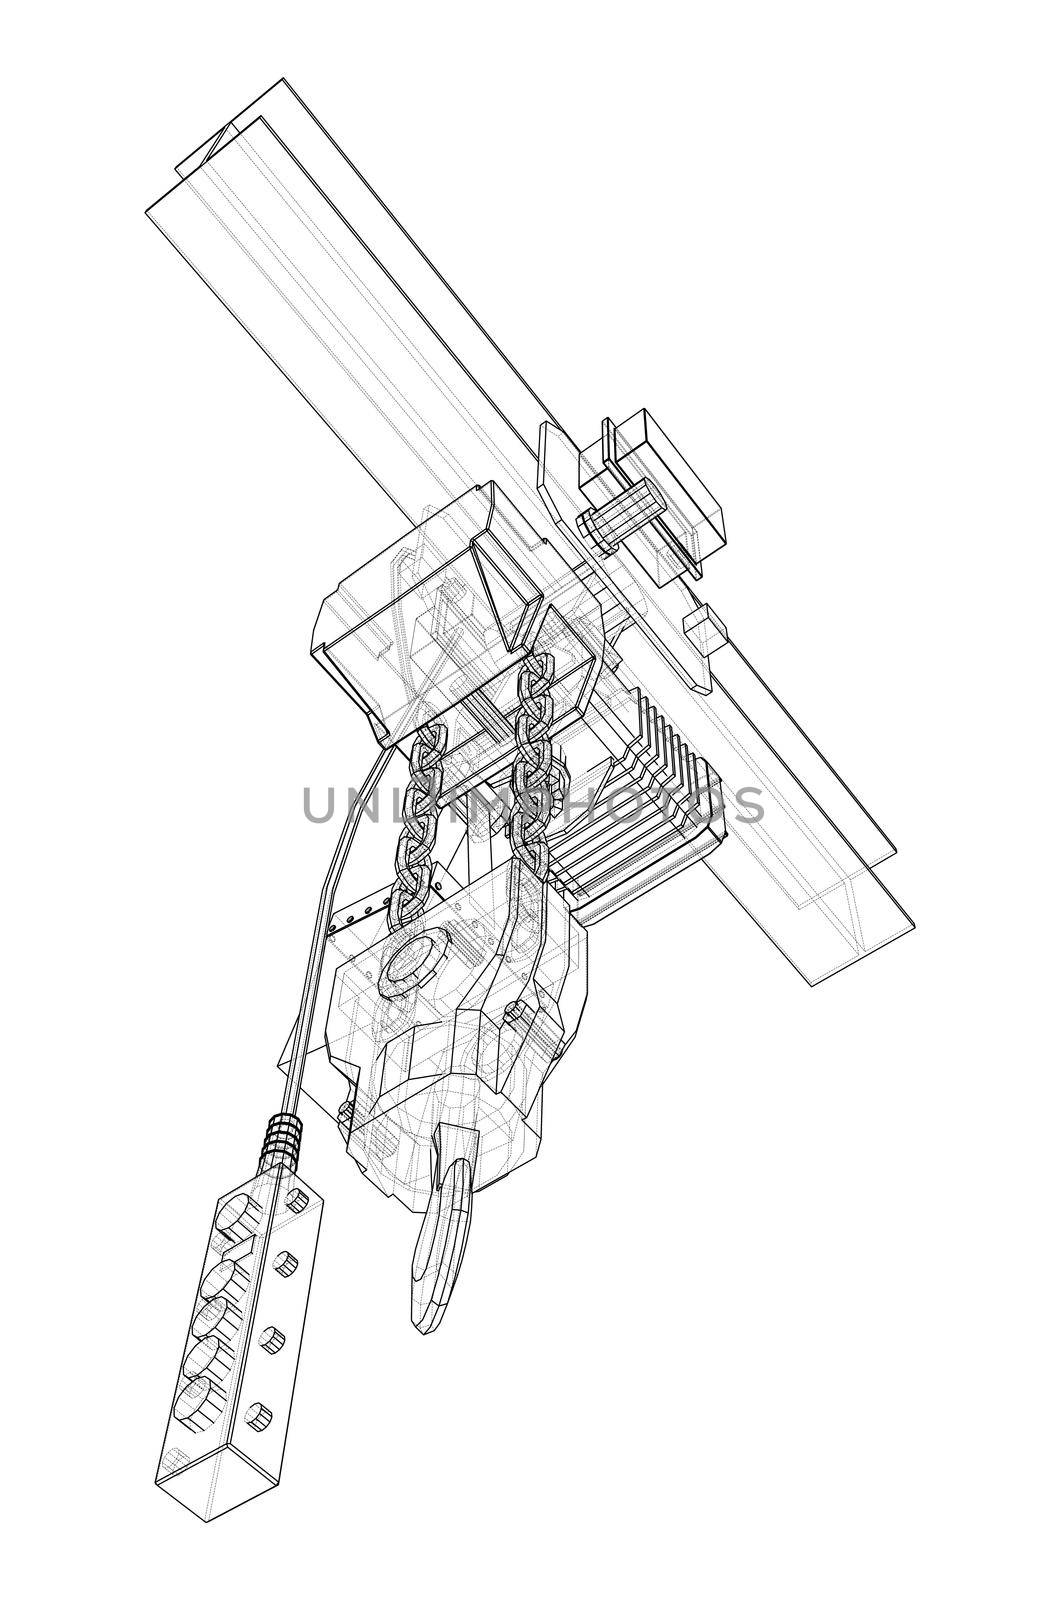 Winch or lifting machine concept outline. 3d illustration. Wire-frame style